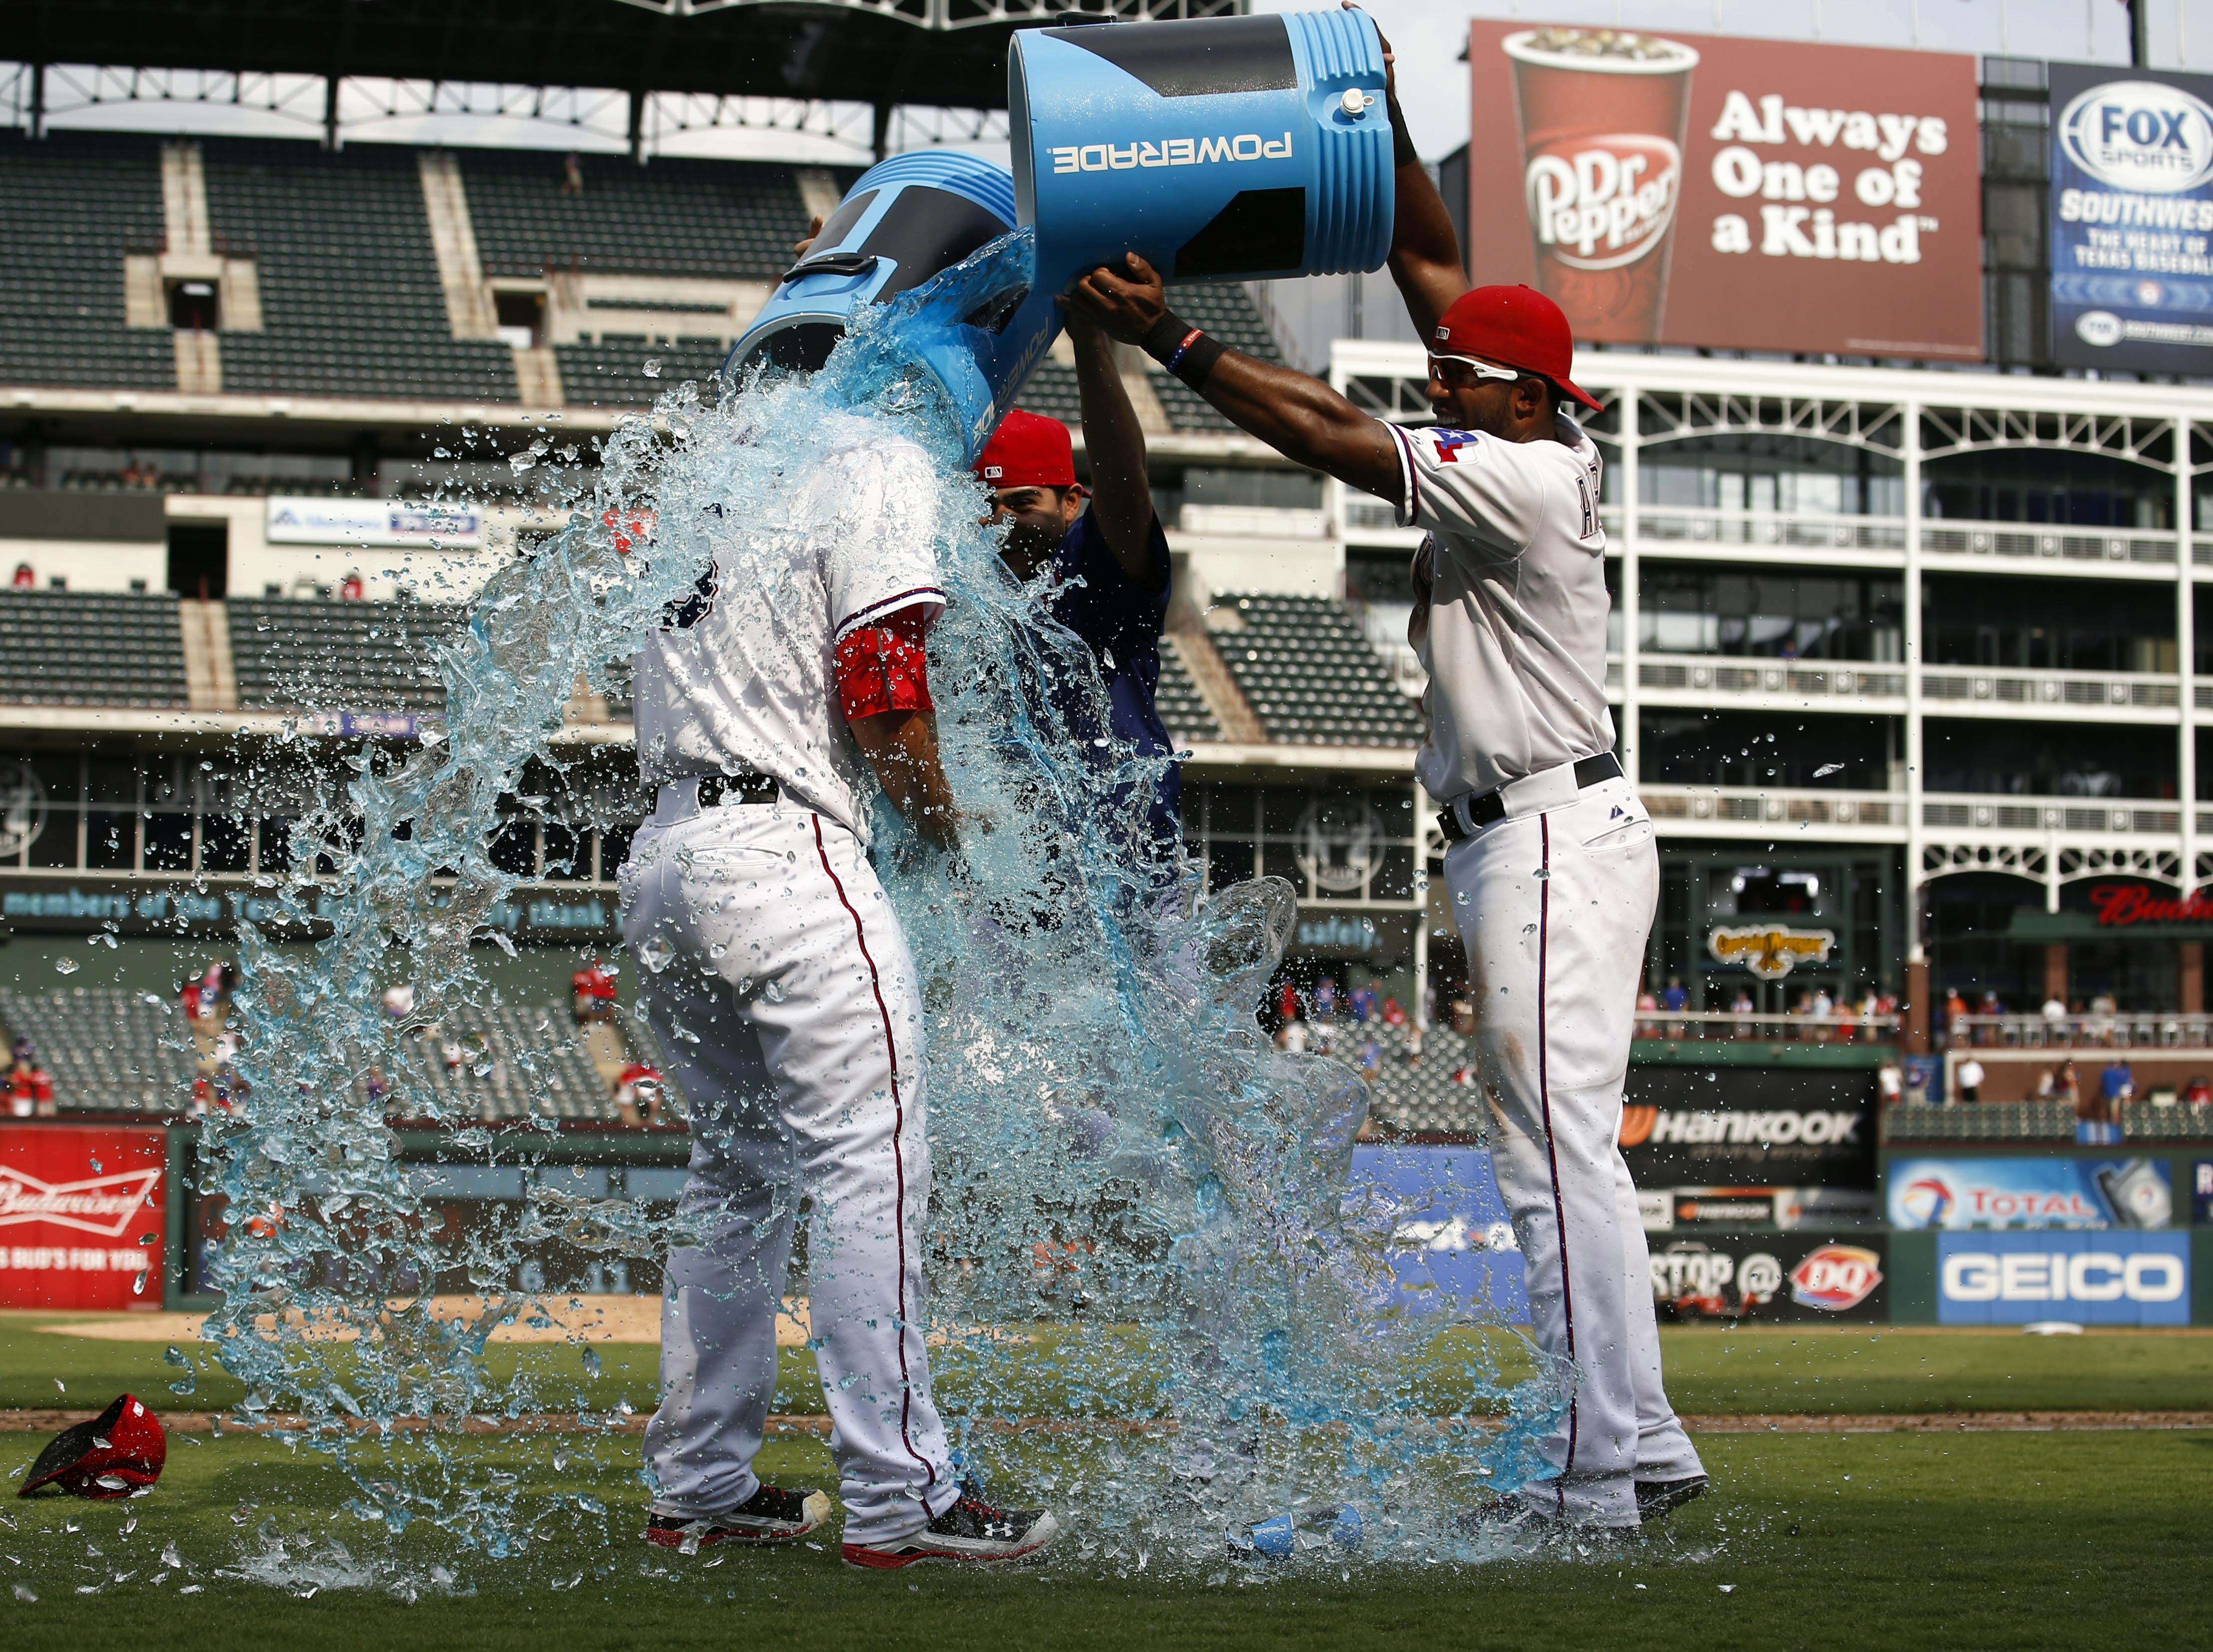 Holland's shutout leads Rangers to sweep of Orioles